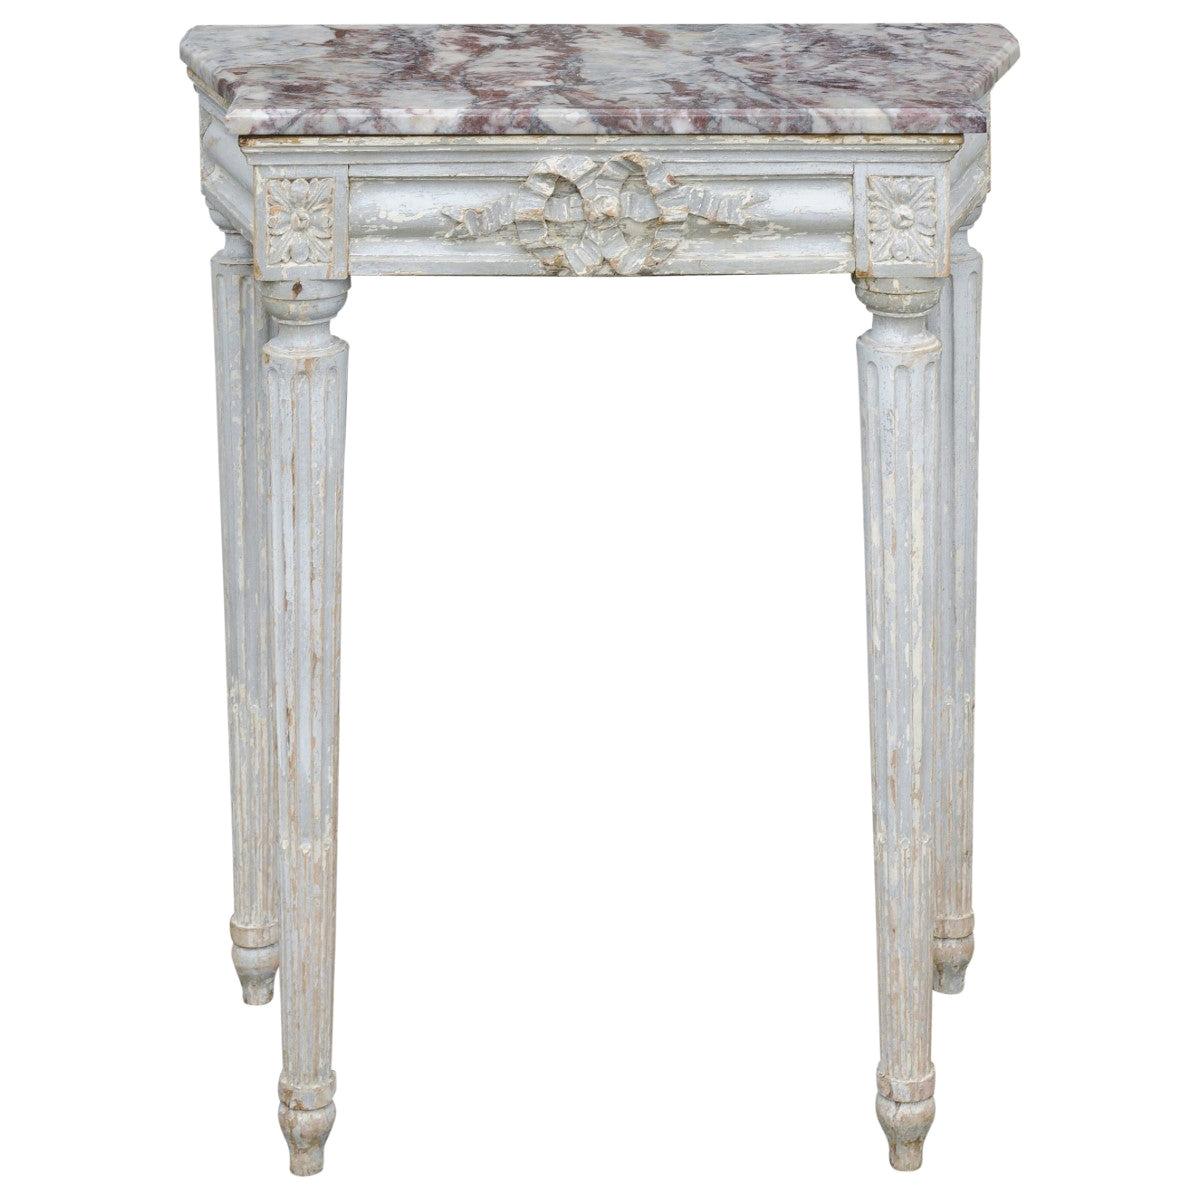 French Neoclassical Period 1800s Painted Wood Console Table with Marble Top For Sale